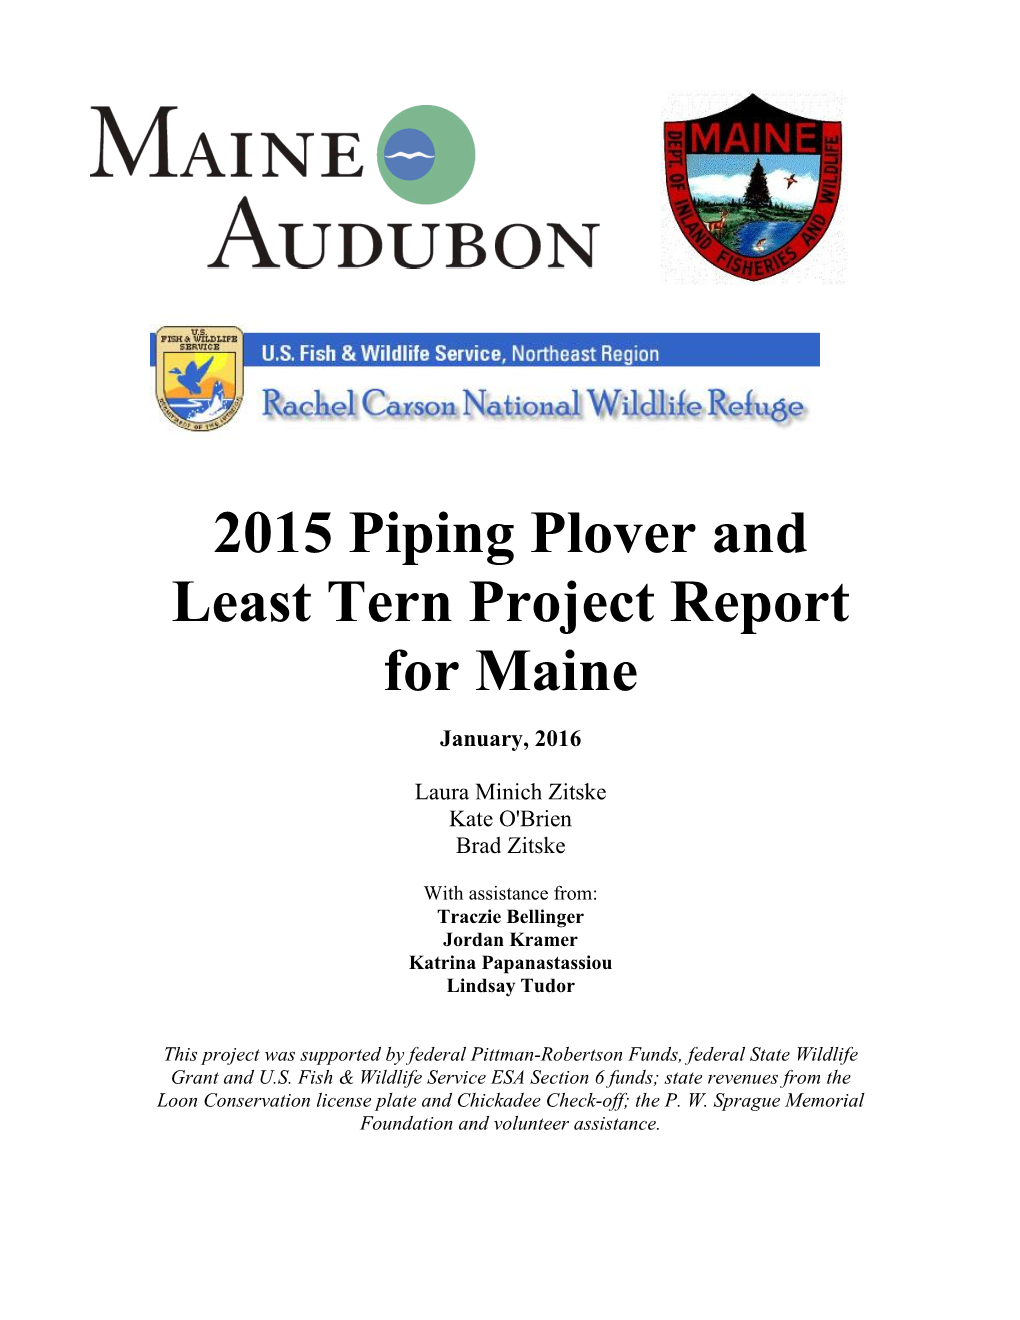 2015 Piping Plover and Least Tern Project Report for Maine